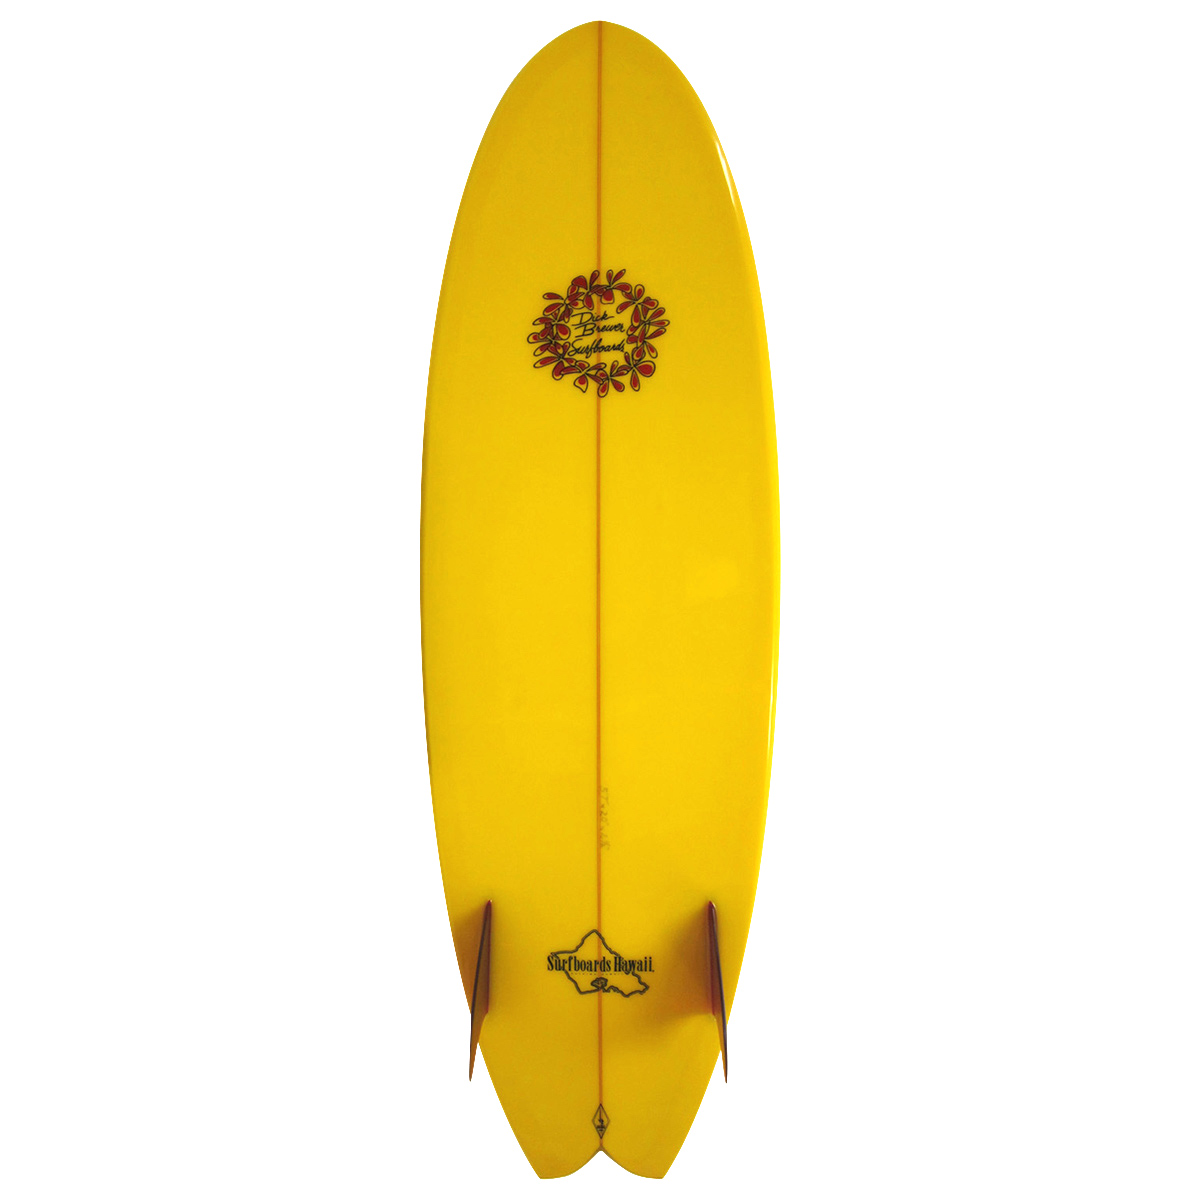 DICK BREWER x SURFBOARDS HAWAII / TWIN FISH 5`7 Shaped By Dick Brewer   Glass By Jack Reeves 